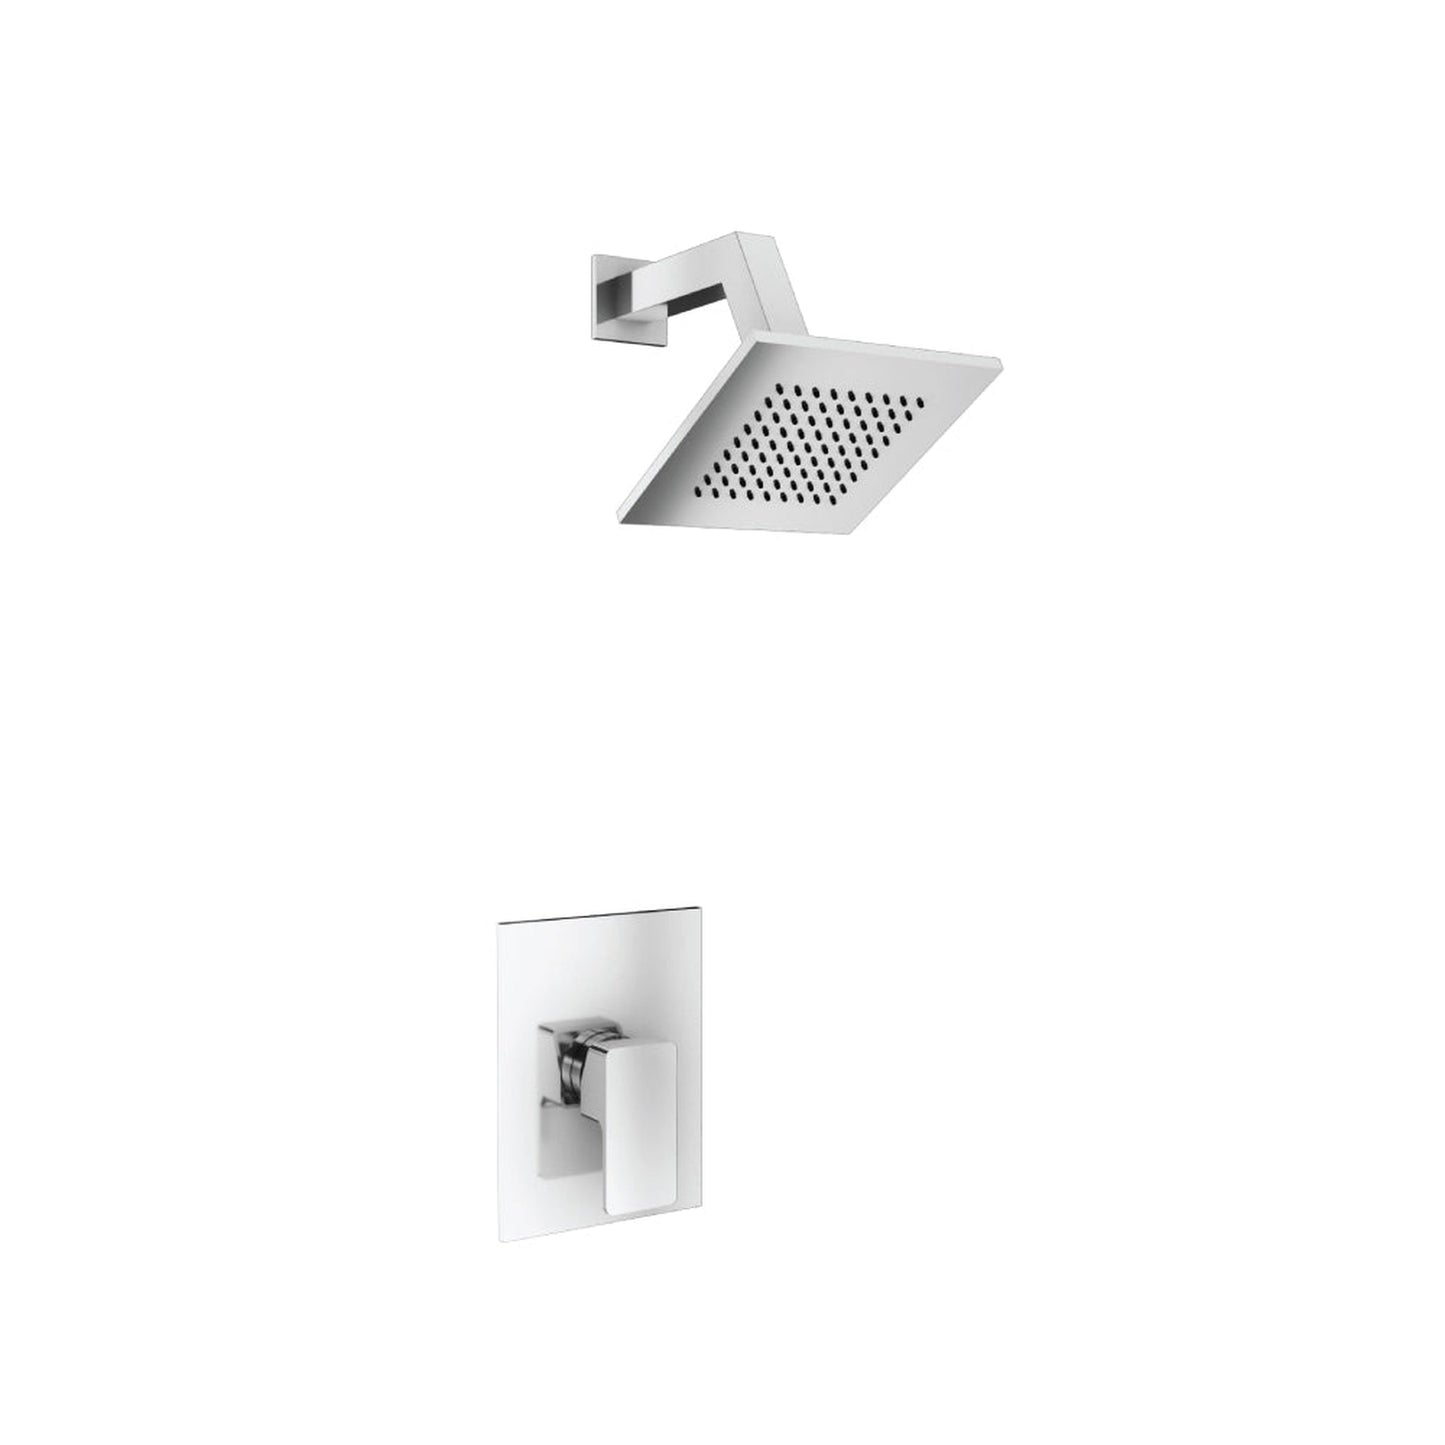 Isenberg Serie 196 Single Output Brushed Nickel PVD Wall-Mounted Shower Set With 6" Solid Brass Rainhead Shower Head, Single Handle Shower Trim and 1-Output Single Control Pressure Balance Valve